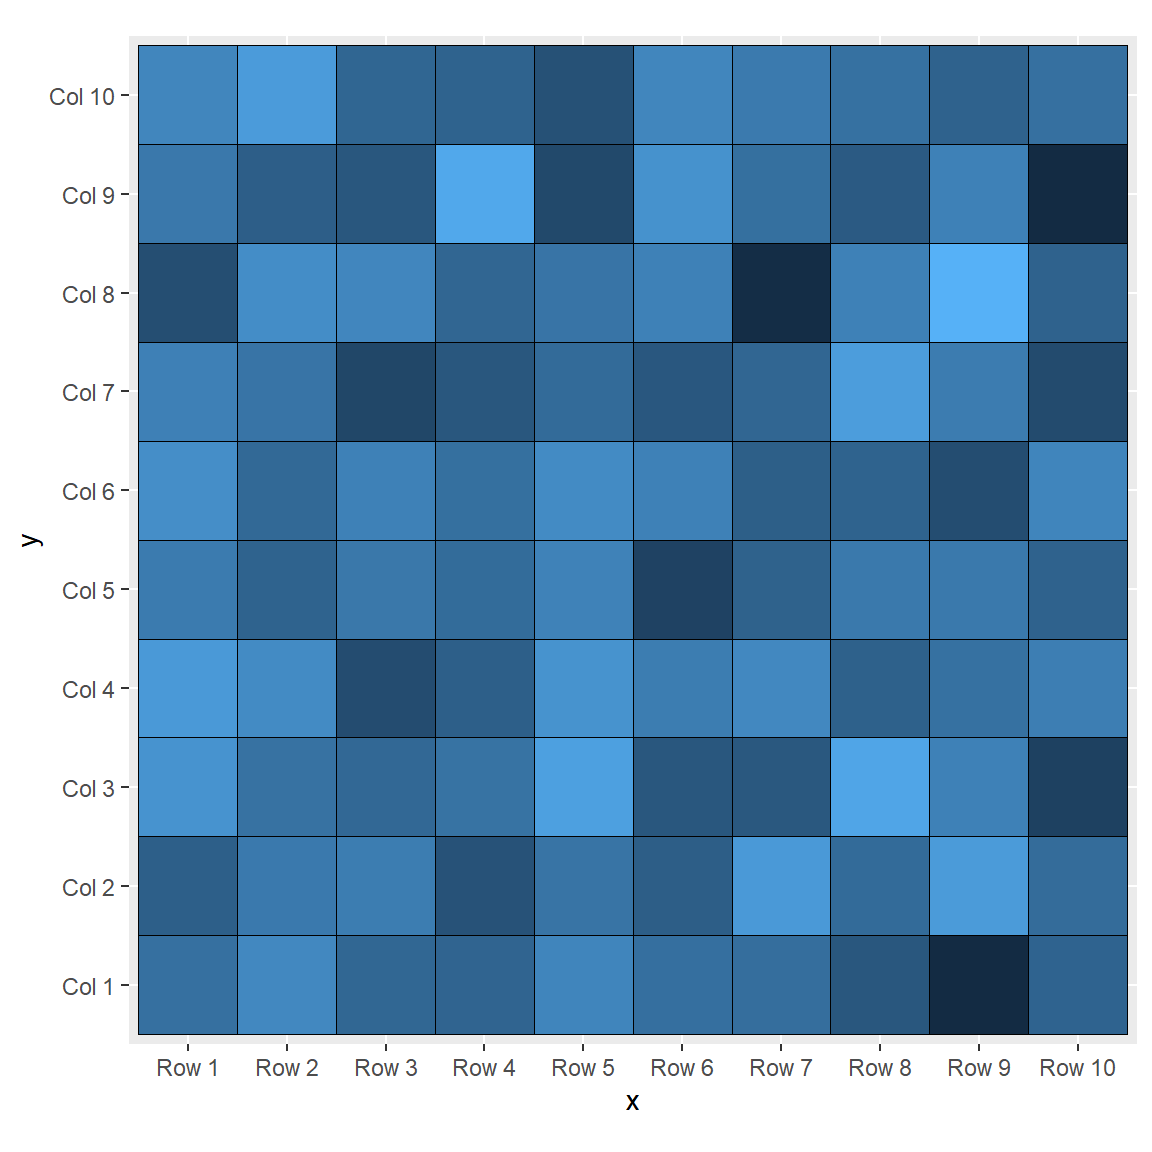 Remove the legend of a heat map in ggplot2